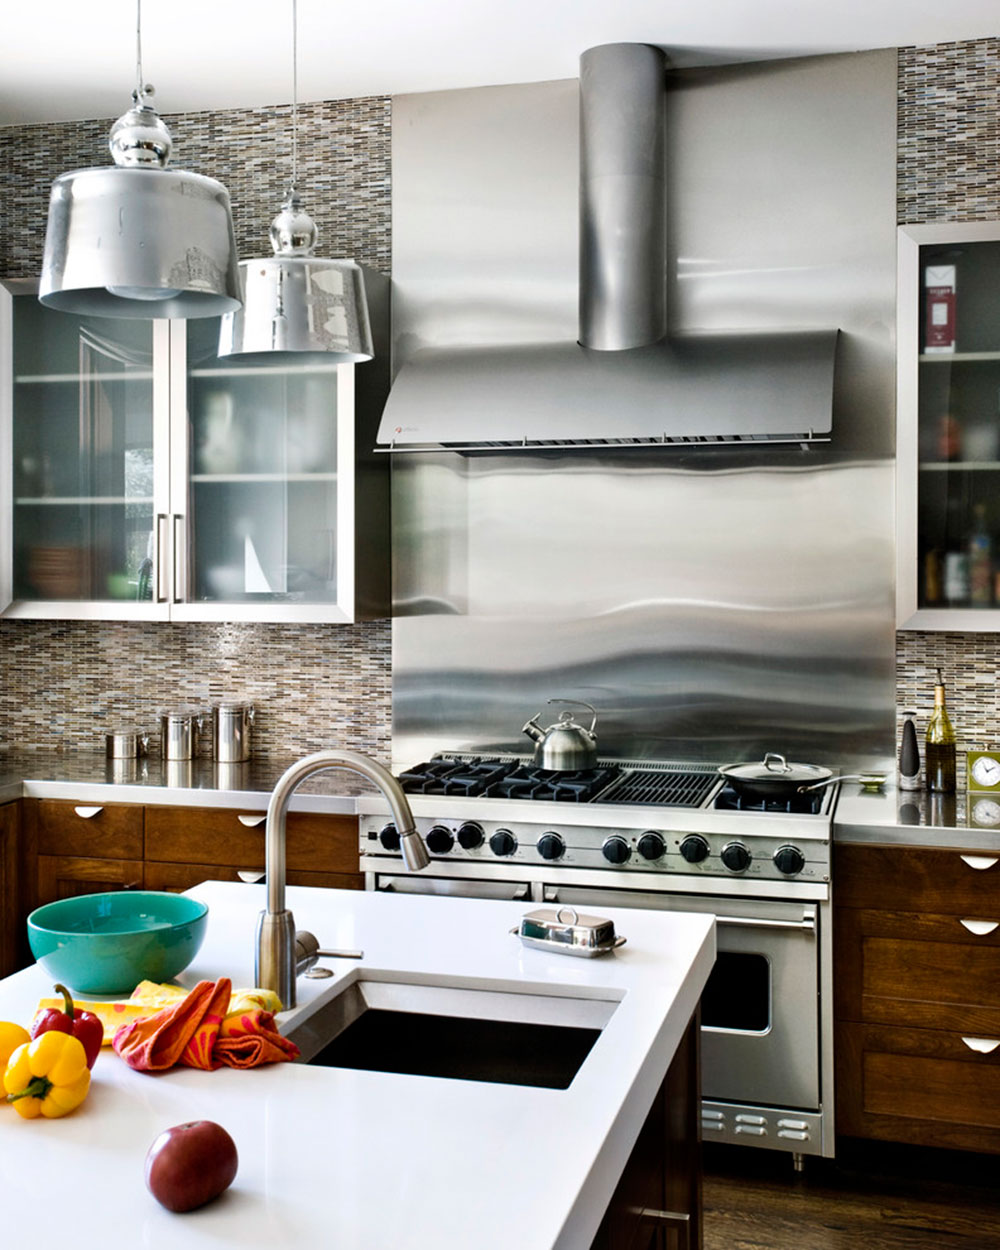 Stainless-Steel-Backsplash-Advantages-Tips-And-Ideas1 Stainless Steel Backsplash - Advantages, Tips And Ideas